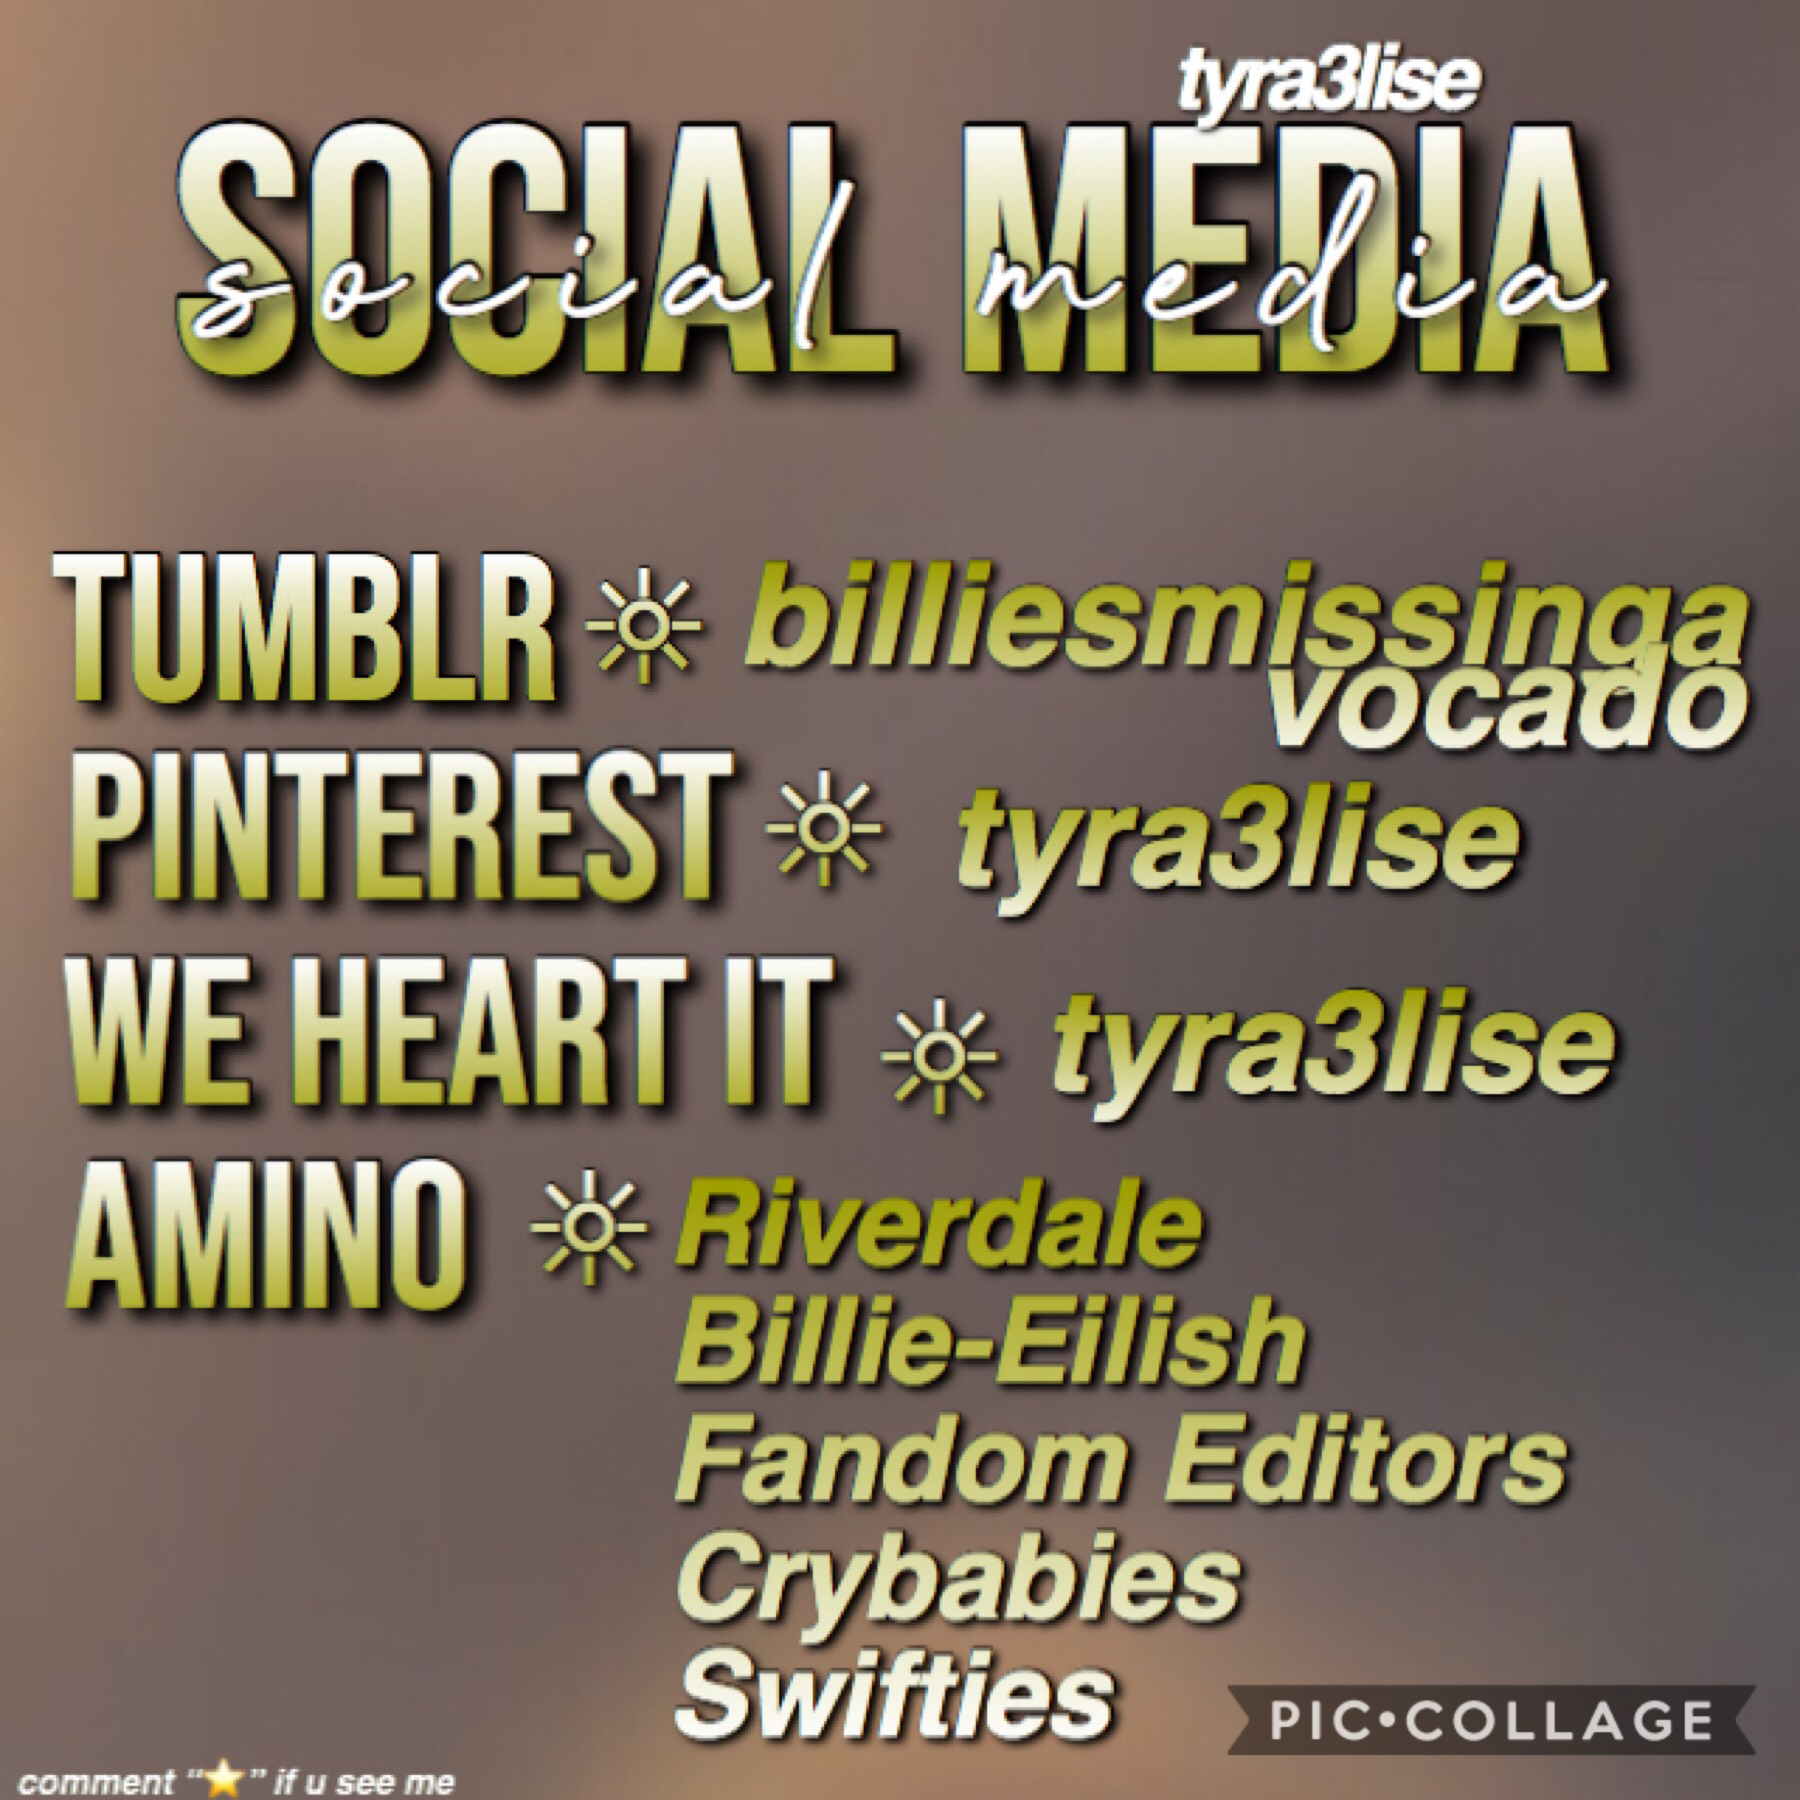 here are some of my social media platforms I have uwu